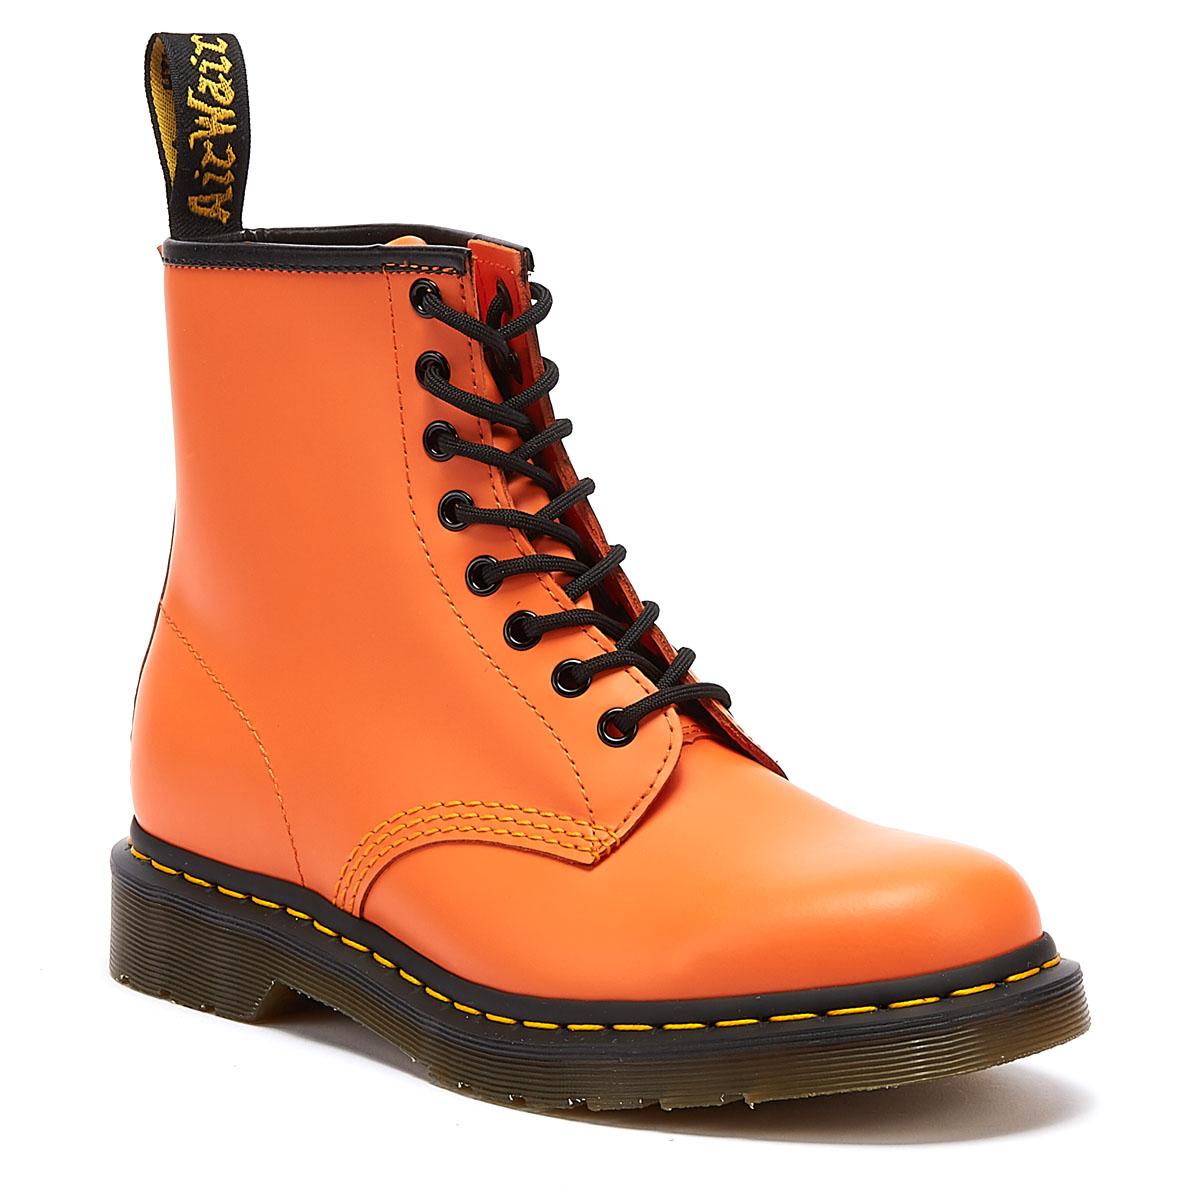 Dr. Martens Dr. Martens 1460 Smooth Leather Womens Orange Boots - Lyst